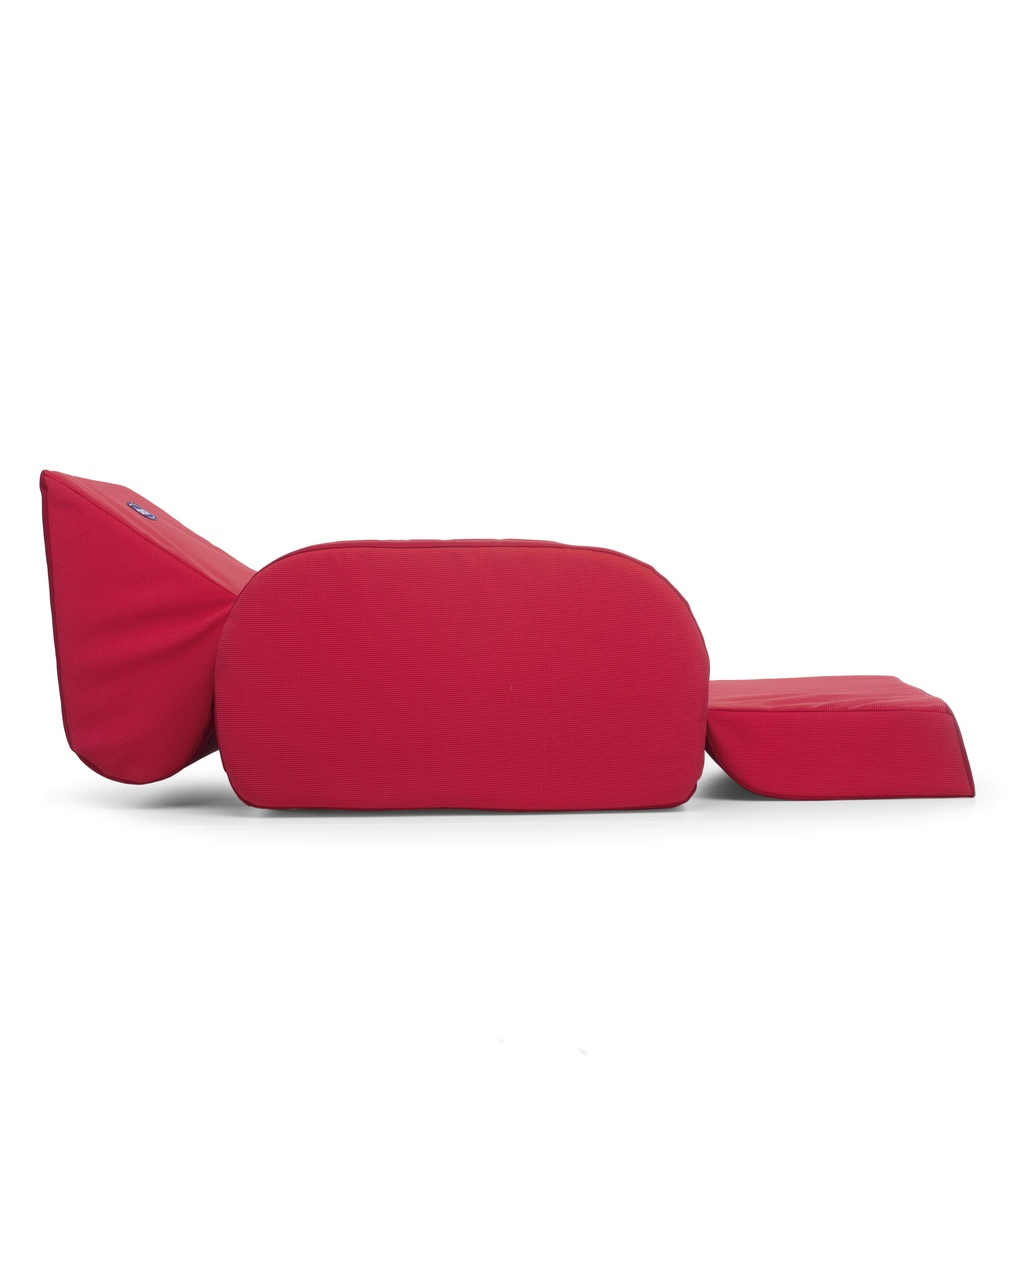 Poltroncina twist red - chicco - Chicco